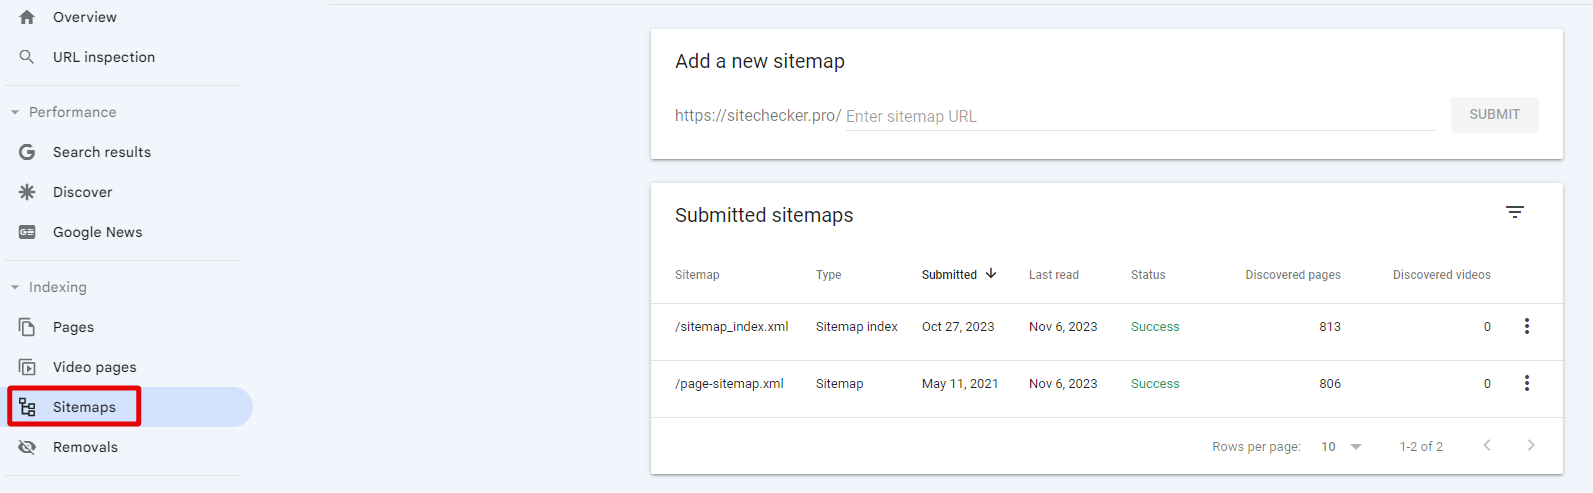 sitemaps page in settings